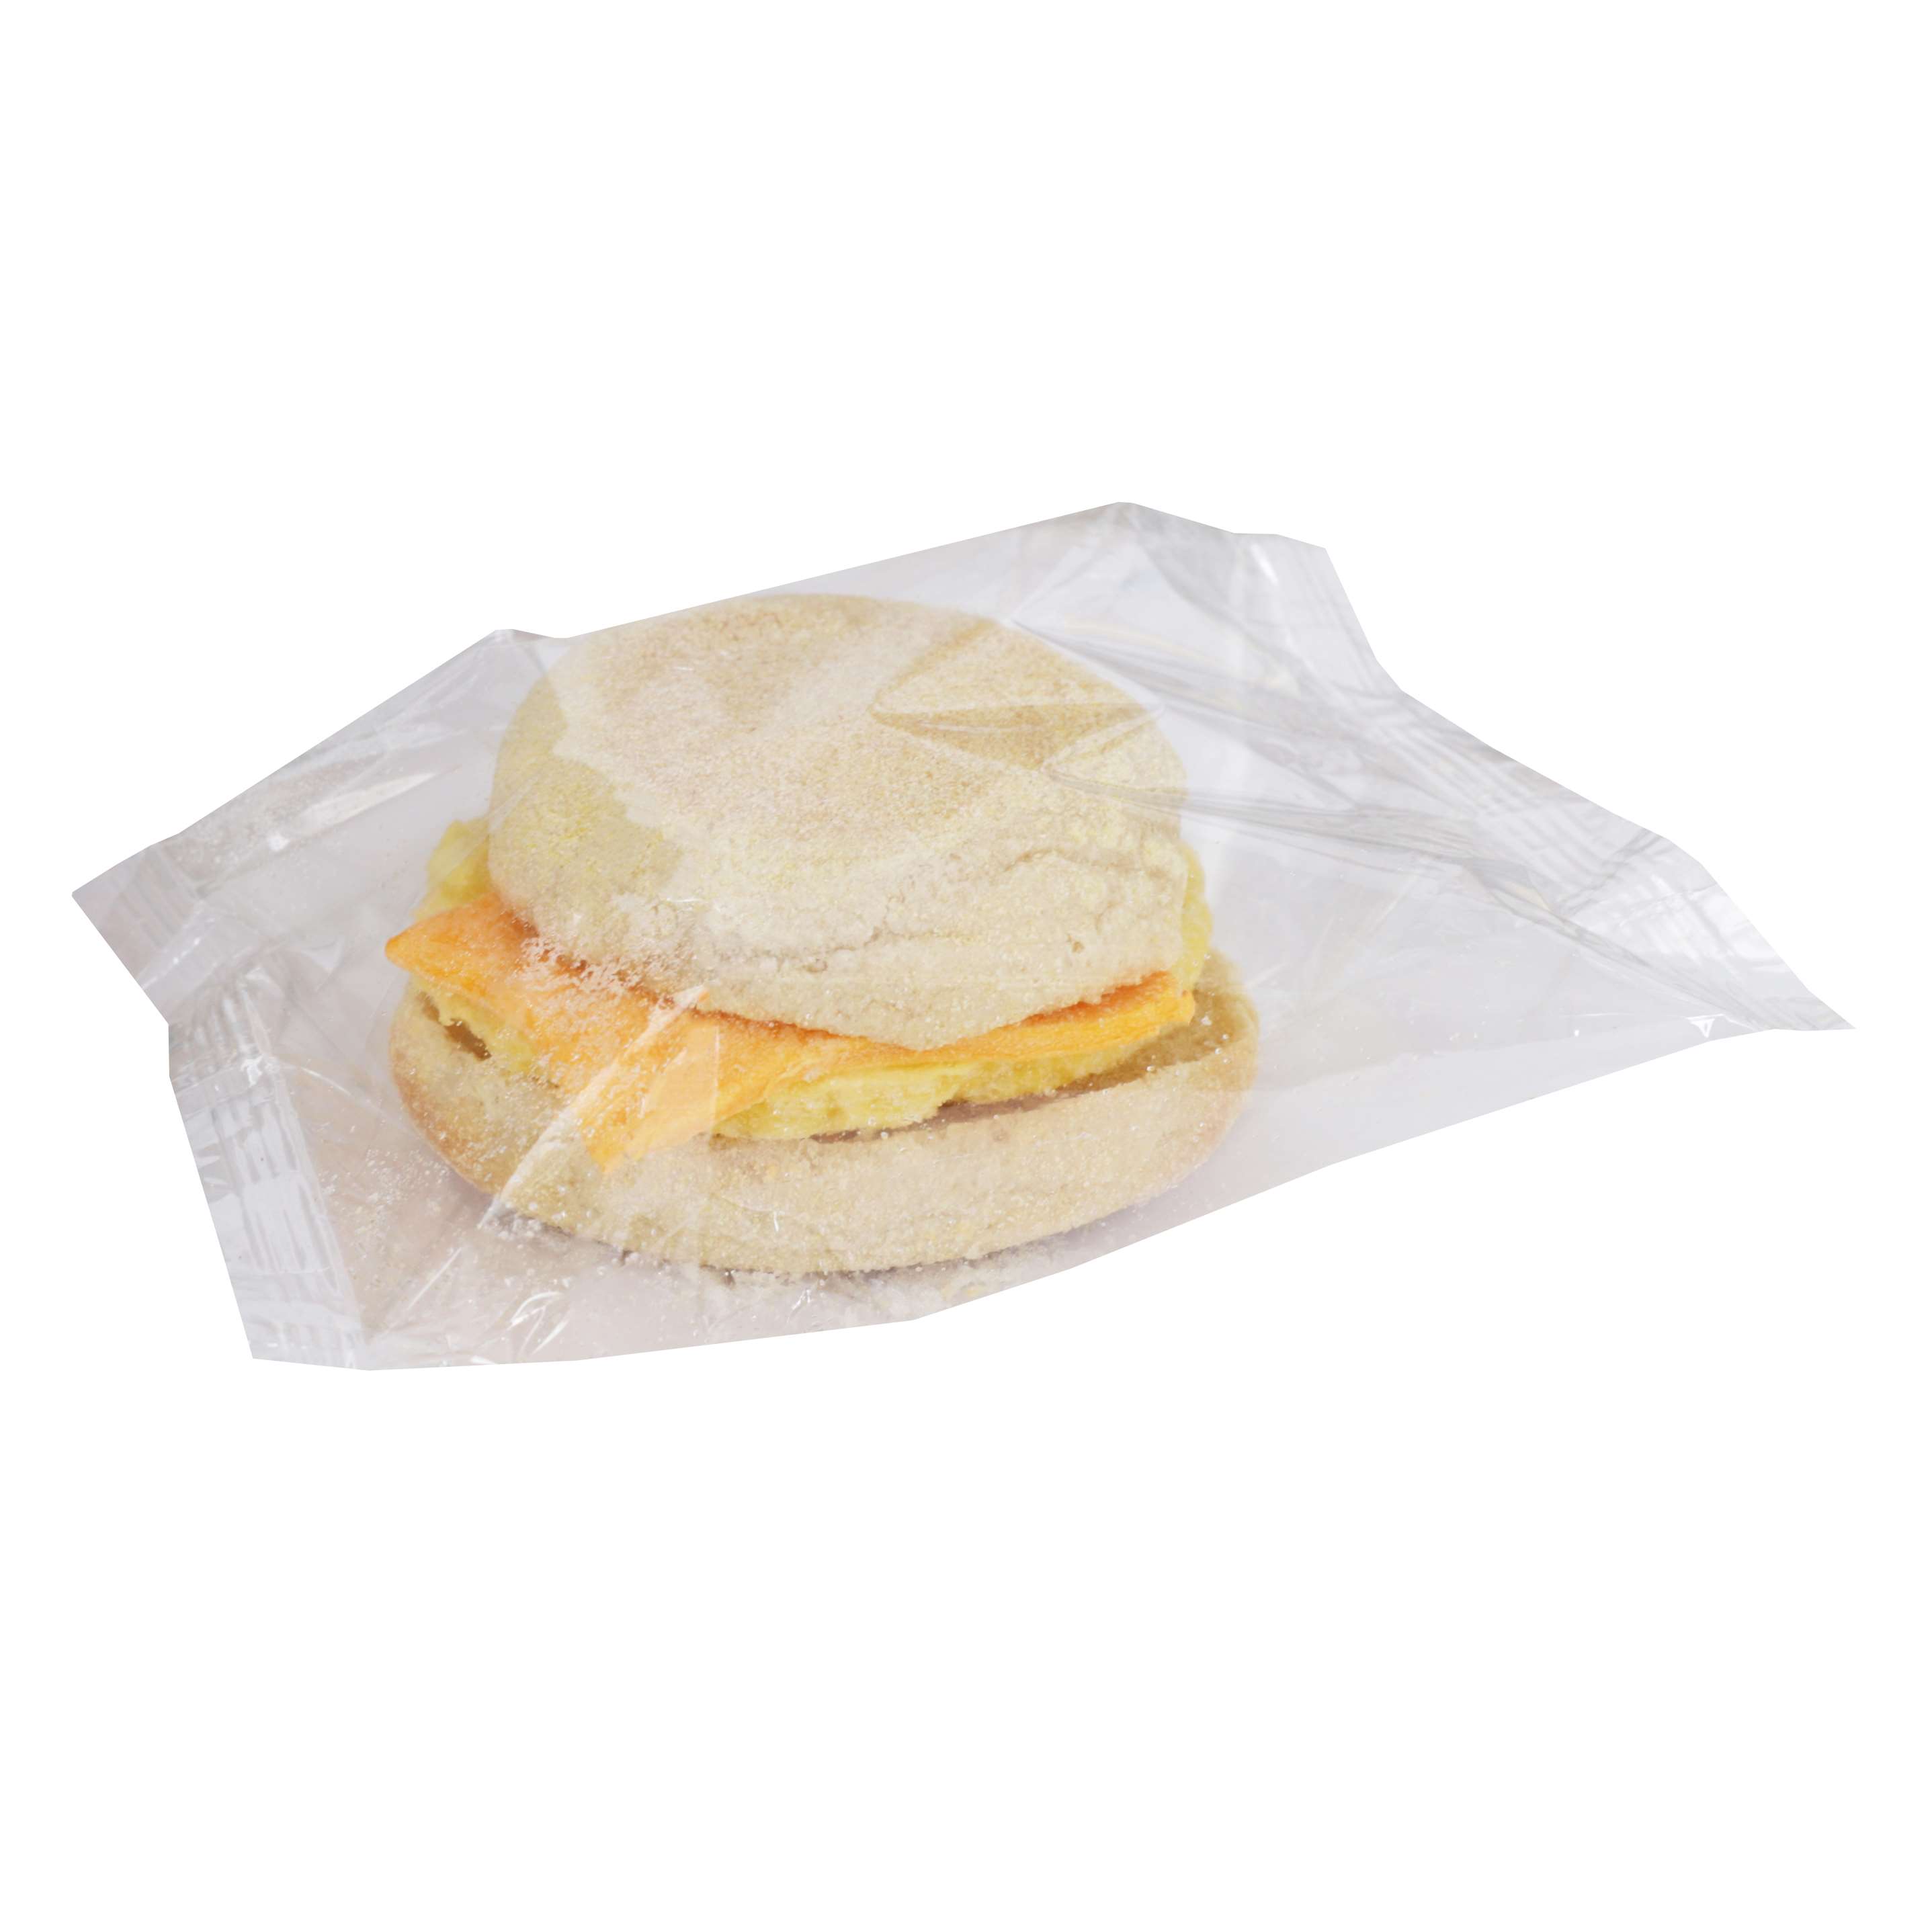 Sandwich Egg & Cheese English Muffin 24/3.3oz (127001) - Sold by PACK